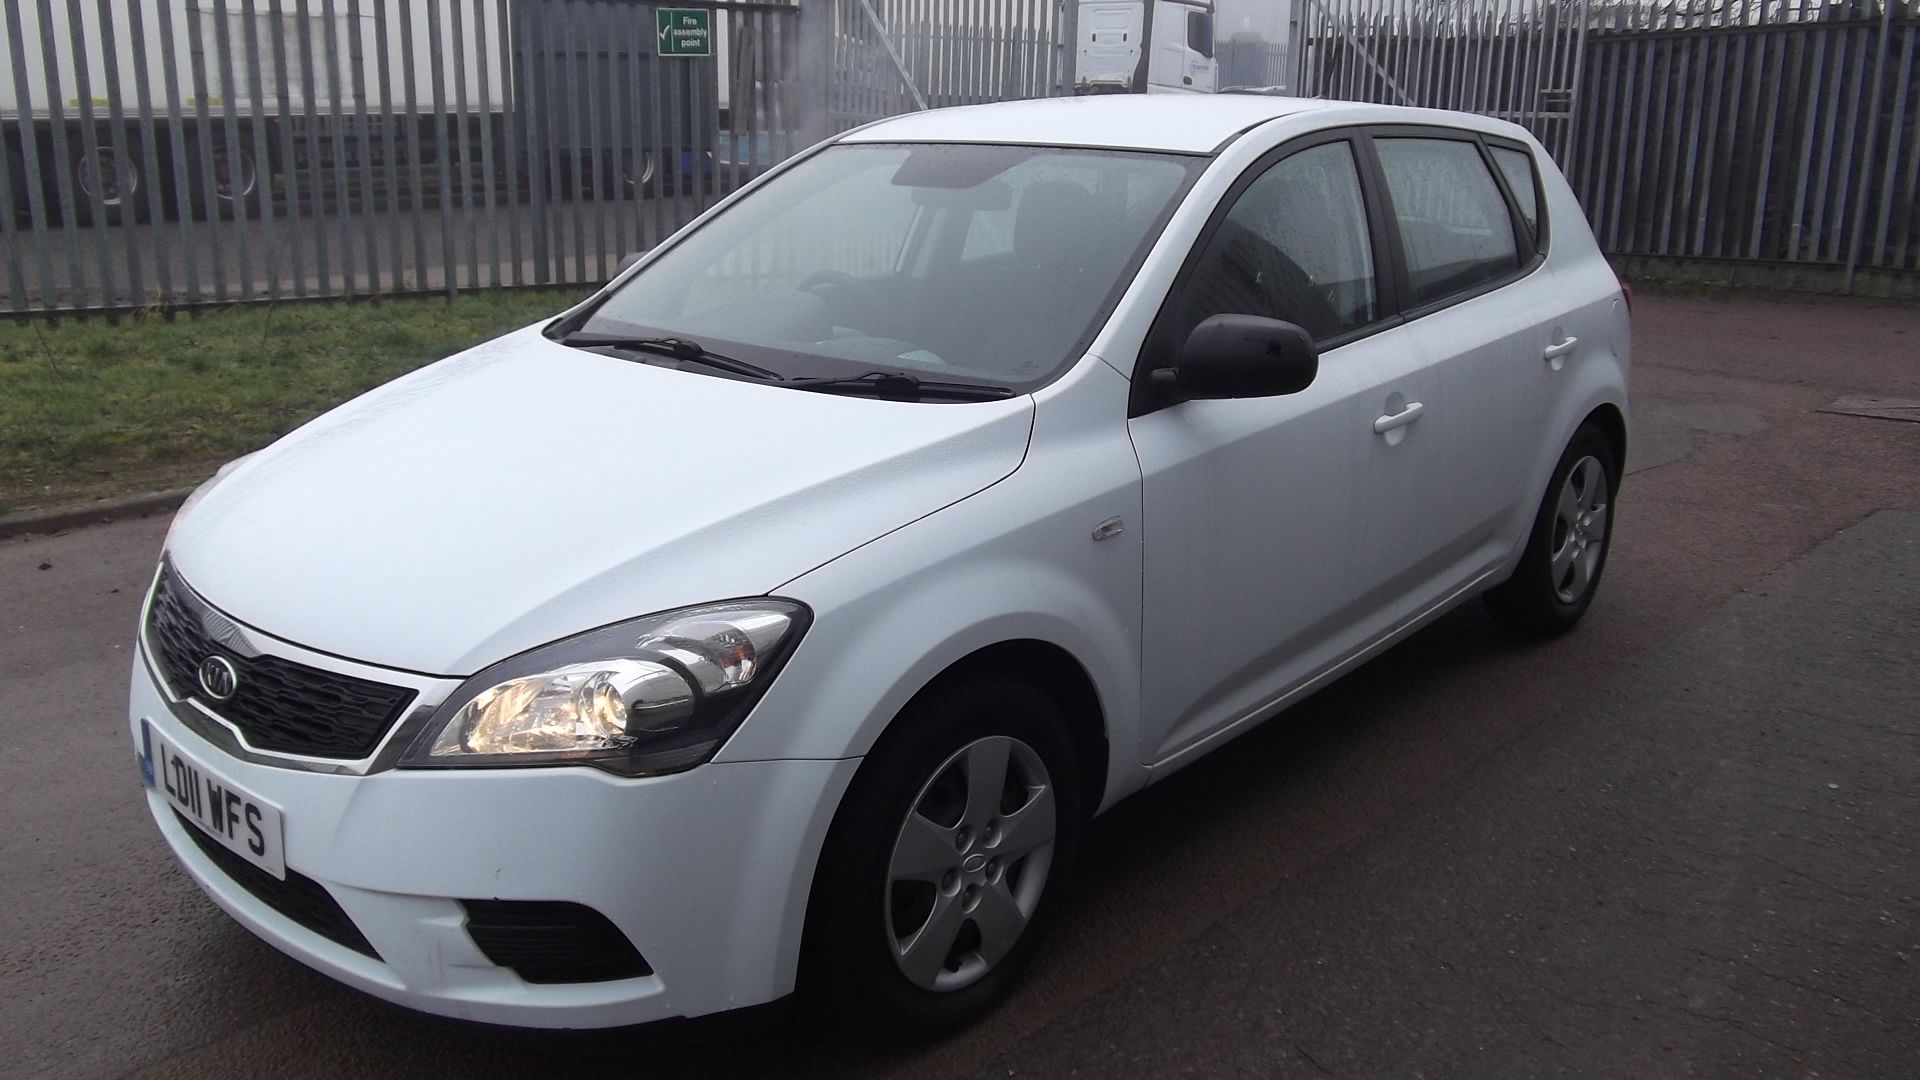 2011 Kia Ceed 1 1.4 5Dr Hatchback - CL505 - NO VAT ON THE HAMMER - Location: Corby, - Image 3 of 14